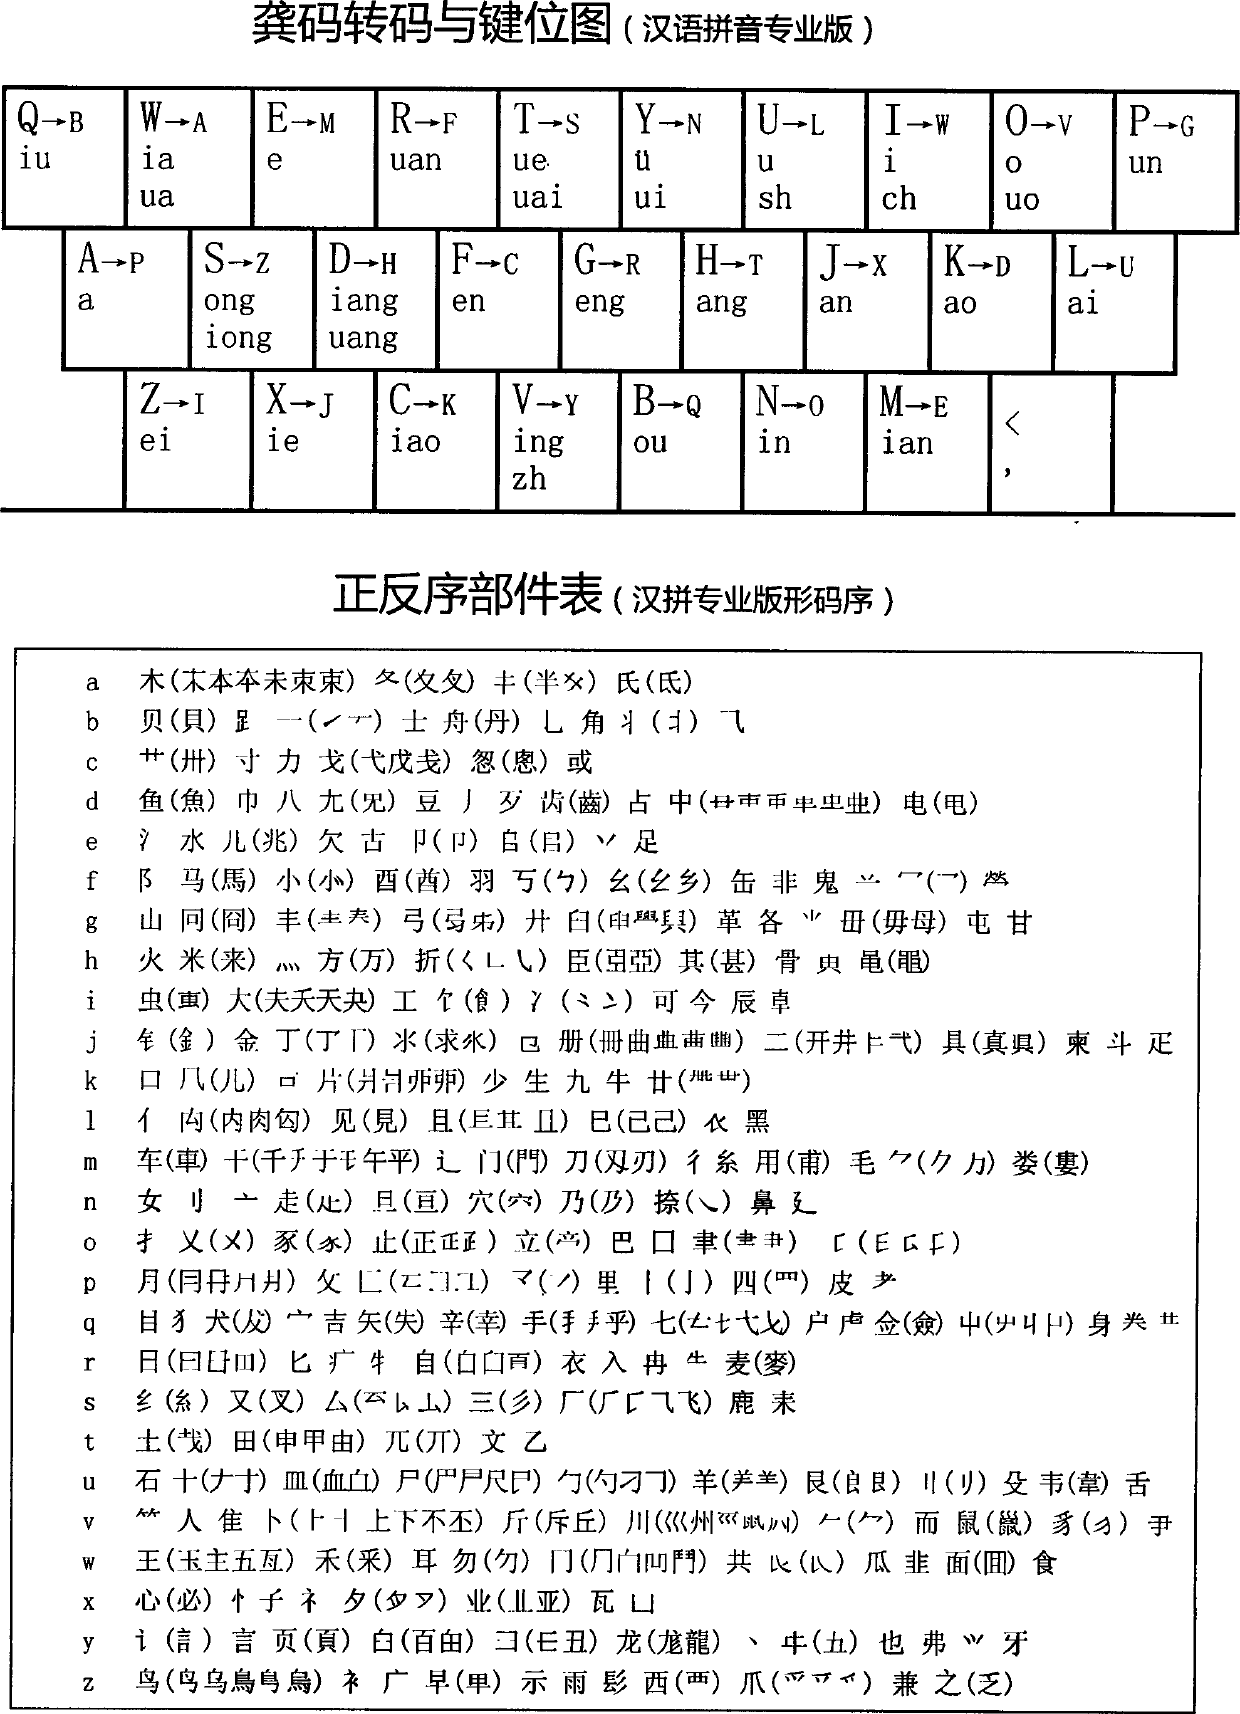 Chinese character positive and negative sequence double-part classification retrieval method and pinyin touch typing intelligent input method